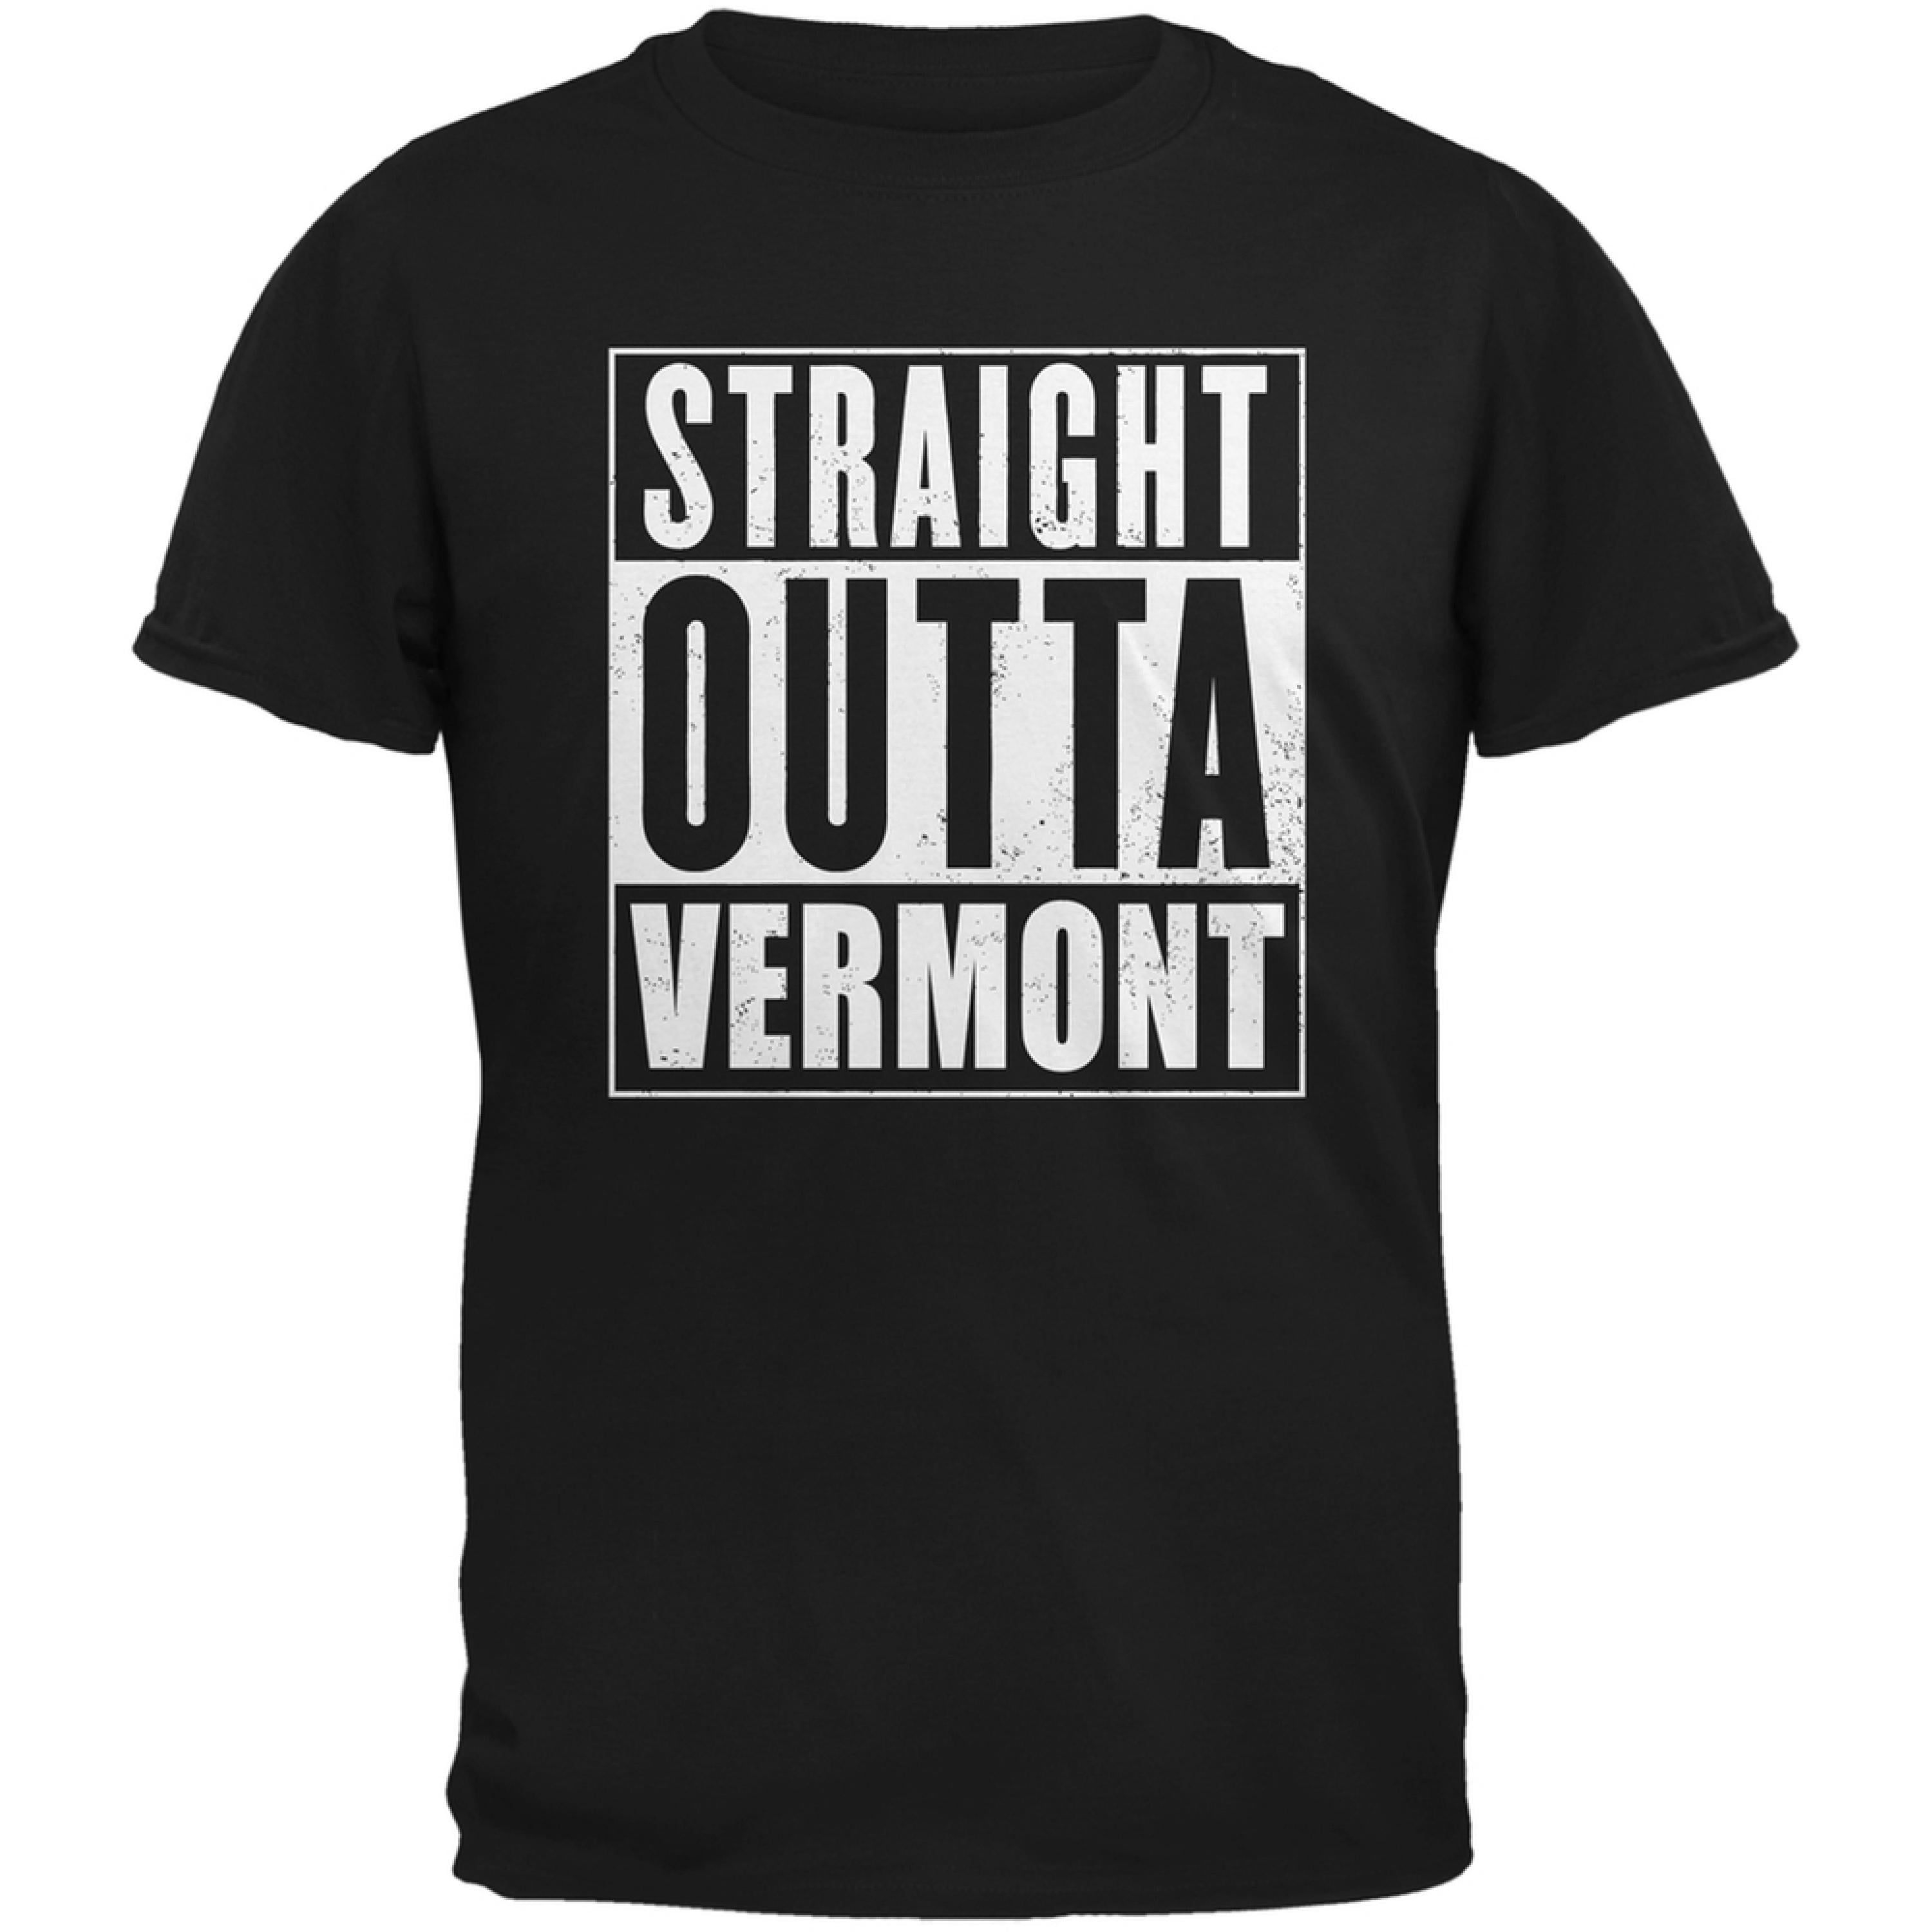 Straight Outta Vermont Black Adult T-Shirt 